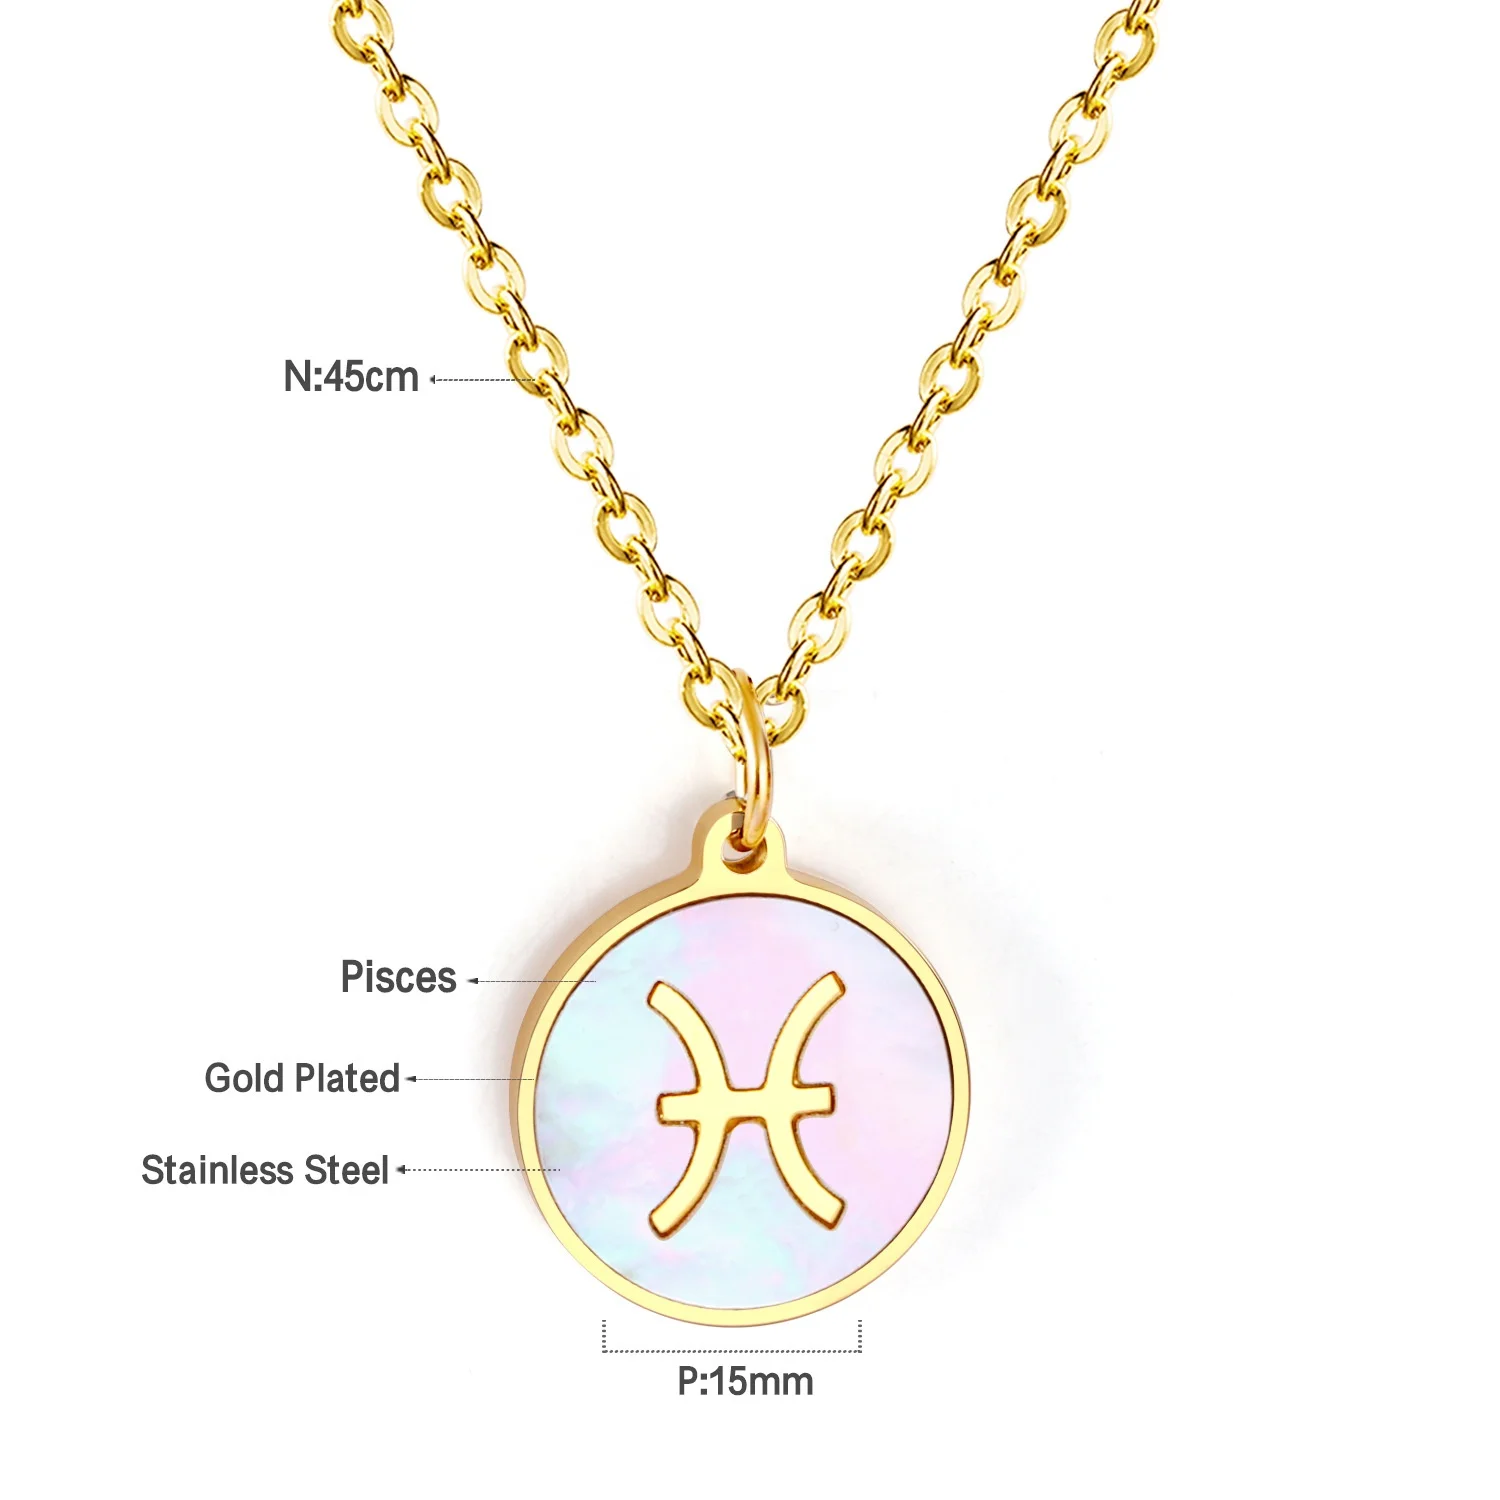 

Hot sale Customized 12 Constellation Jewelry 18k Gold Silver Horoscope Zodiac Sign Coin Pendant Necklace for Women Birthday Gift